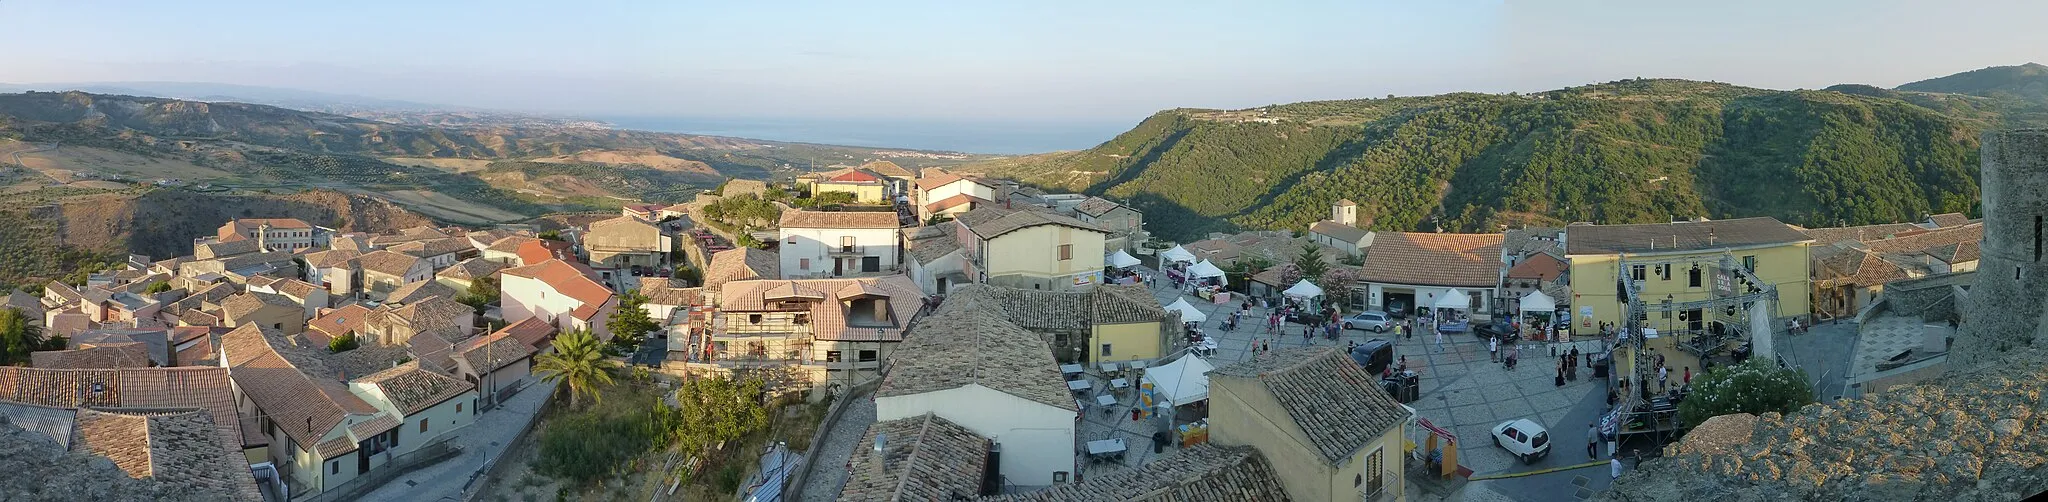 Image of Squillace